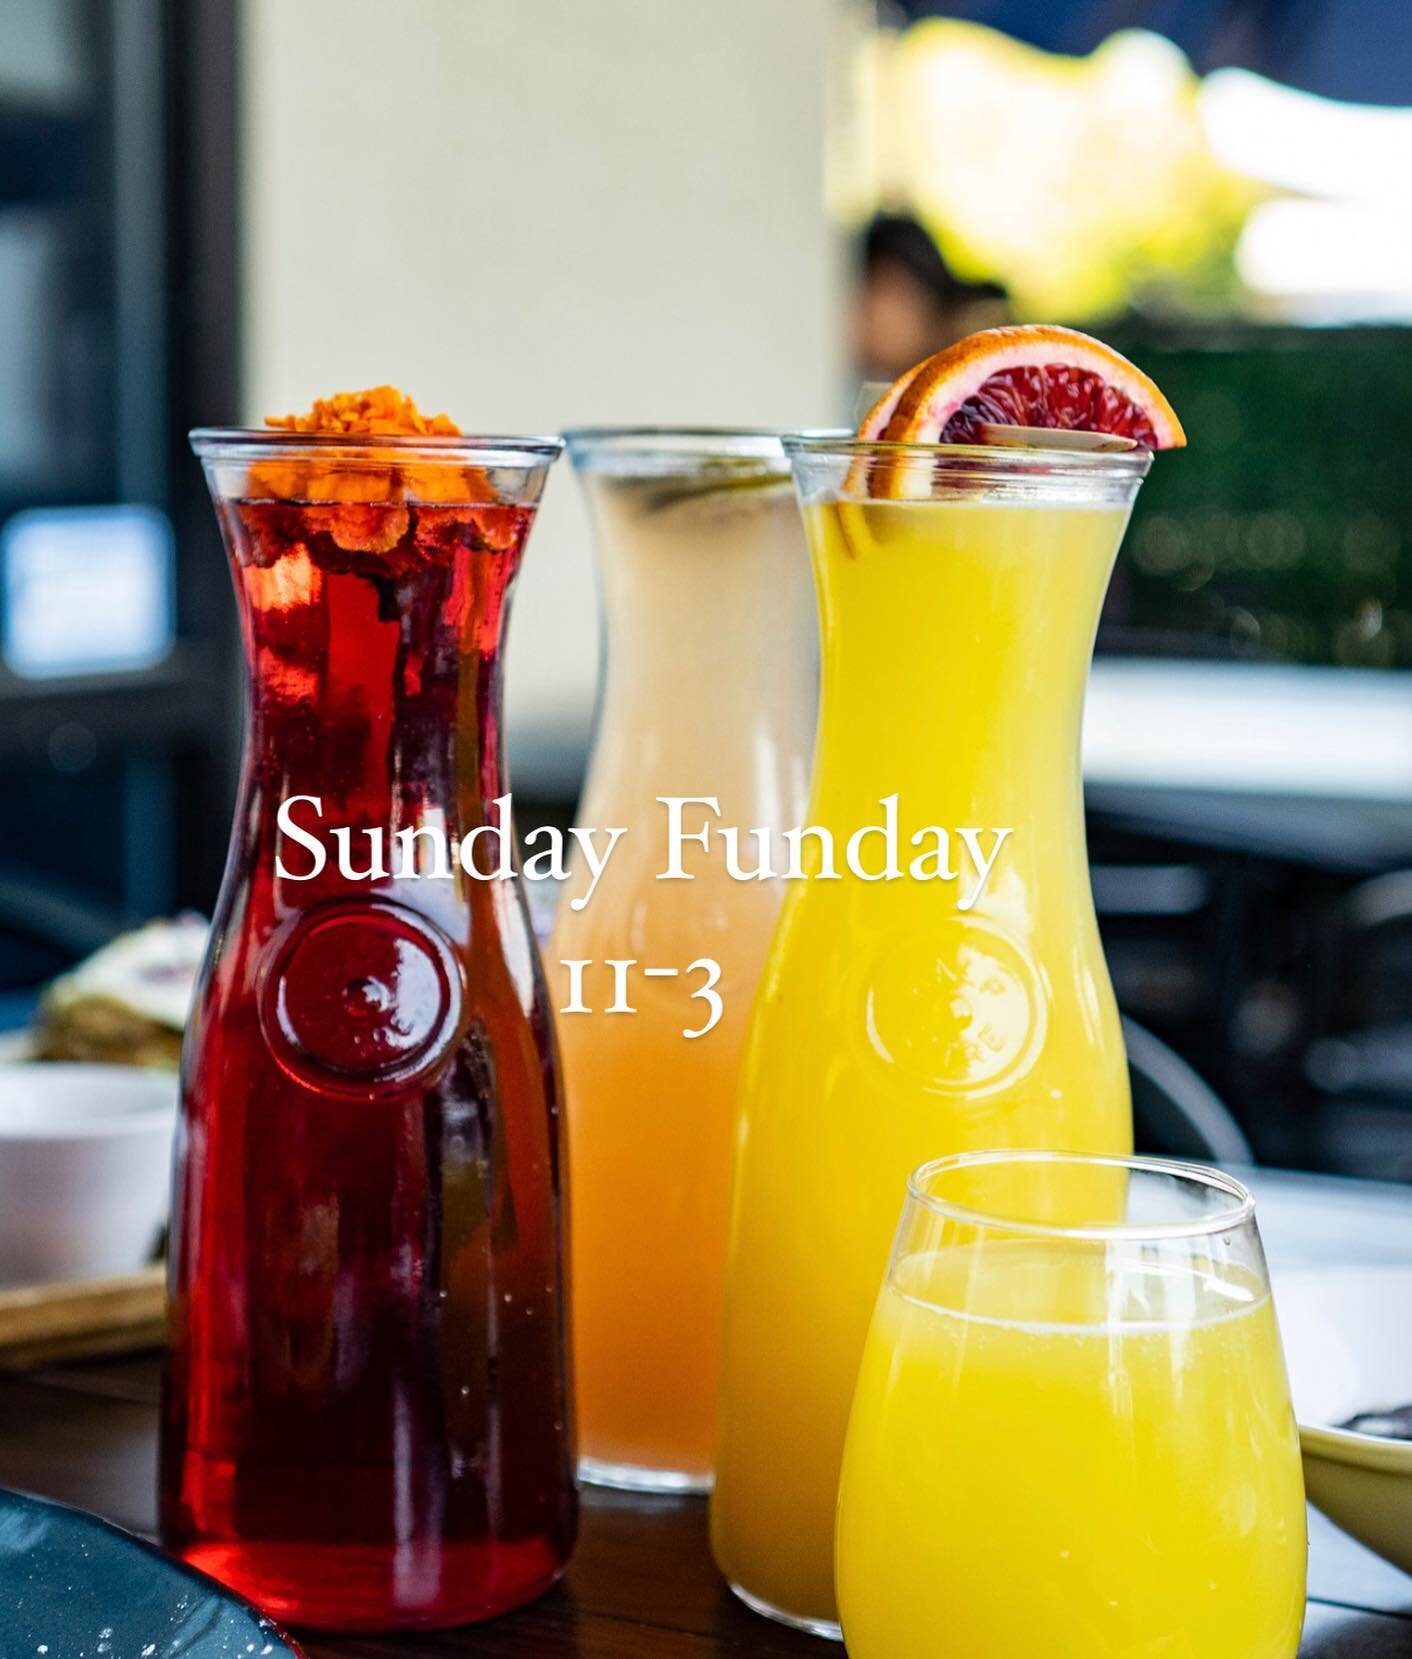 THE SUNDAY FUNDAY SHENANIGANS ARE HERE!!☀️🥂🍳 Reserve NOW! Agave-Azul.com 🍾🥳